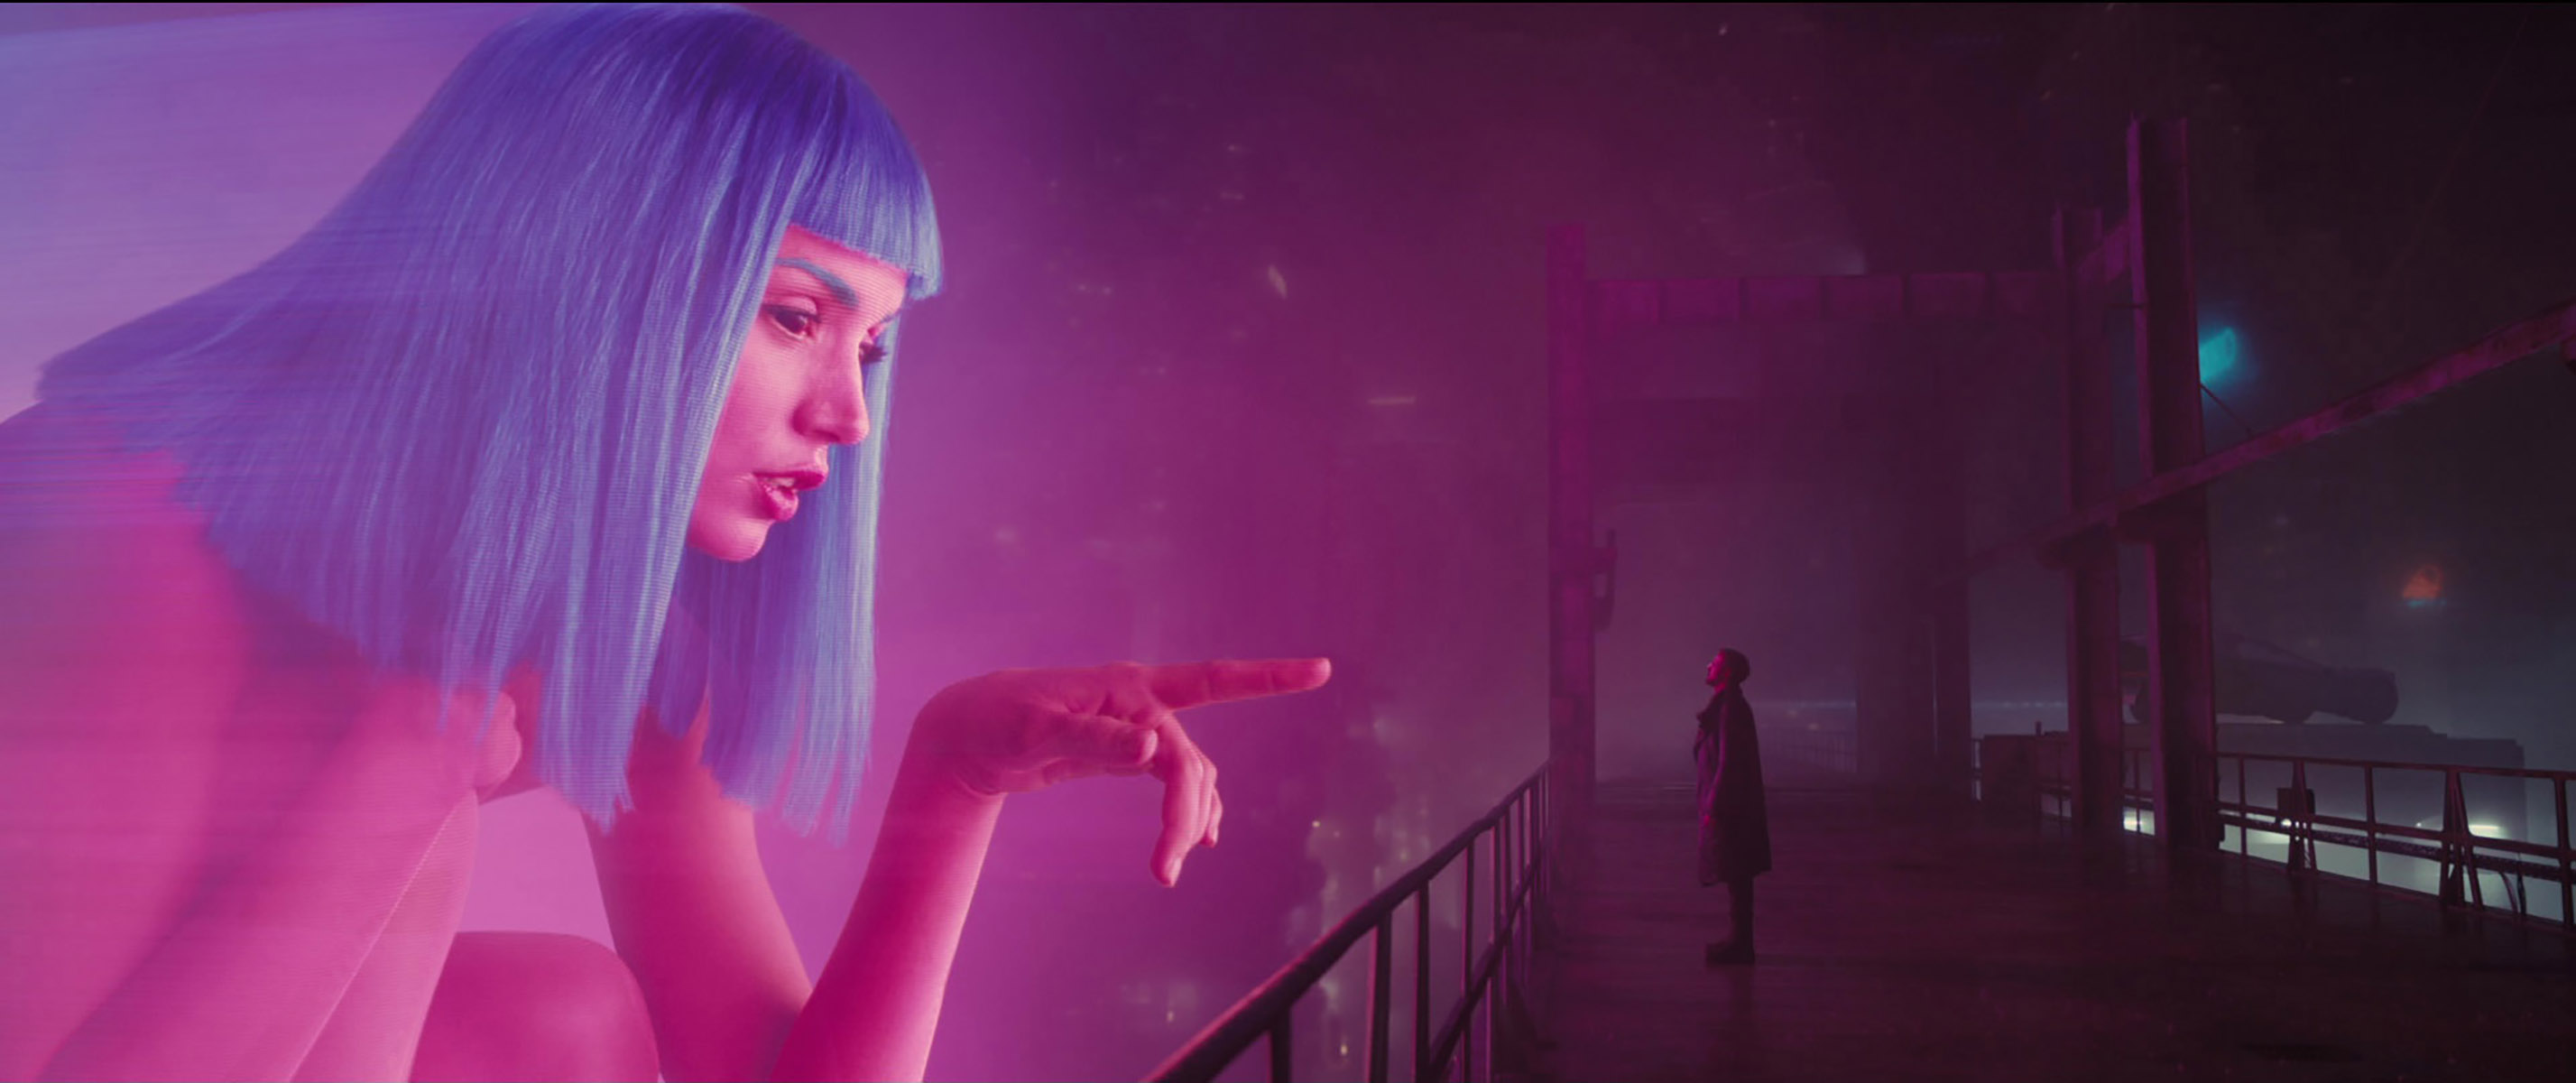 (L-R) ANA DE ARMAS as Joi and RYAN GOSLING as K in Alcon Entertainment's action thriller "BLADE RUNNER 2049," a Warner Bros. Pictures and Sony Pictures Entertainment release, domestic distribution by Warner Bros. Pictures and international distribution by Sony Pictures. Photo Credit: Courtesy of Alcon Entertainment. Copyright: © 2017 ALCON ENTERTAINMENT, LLC